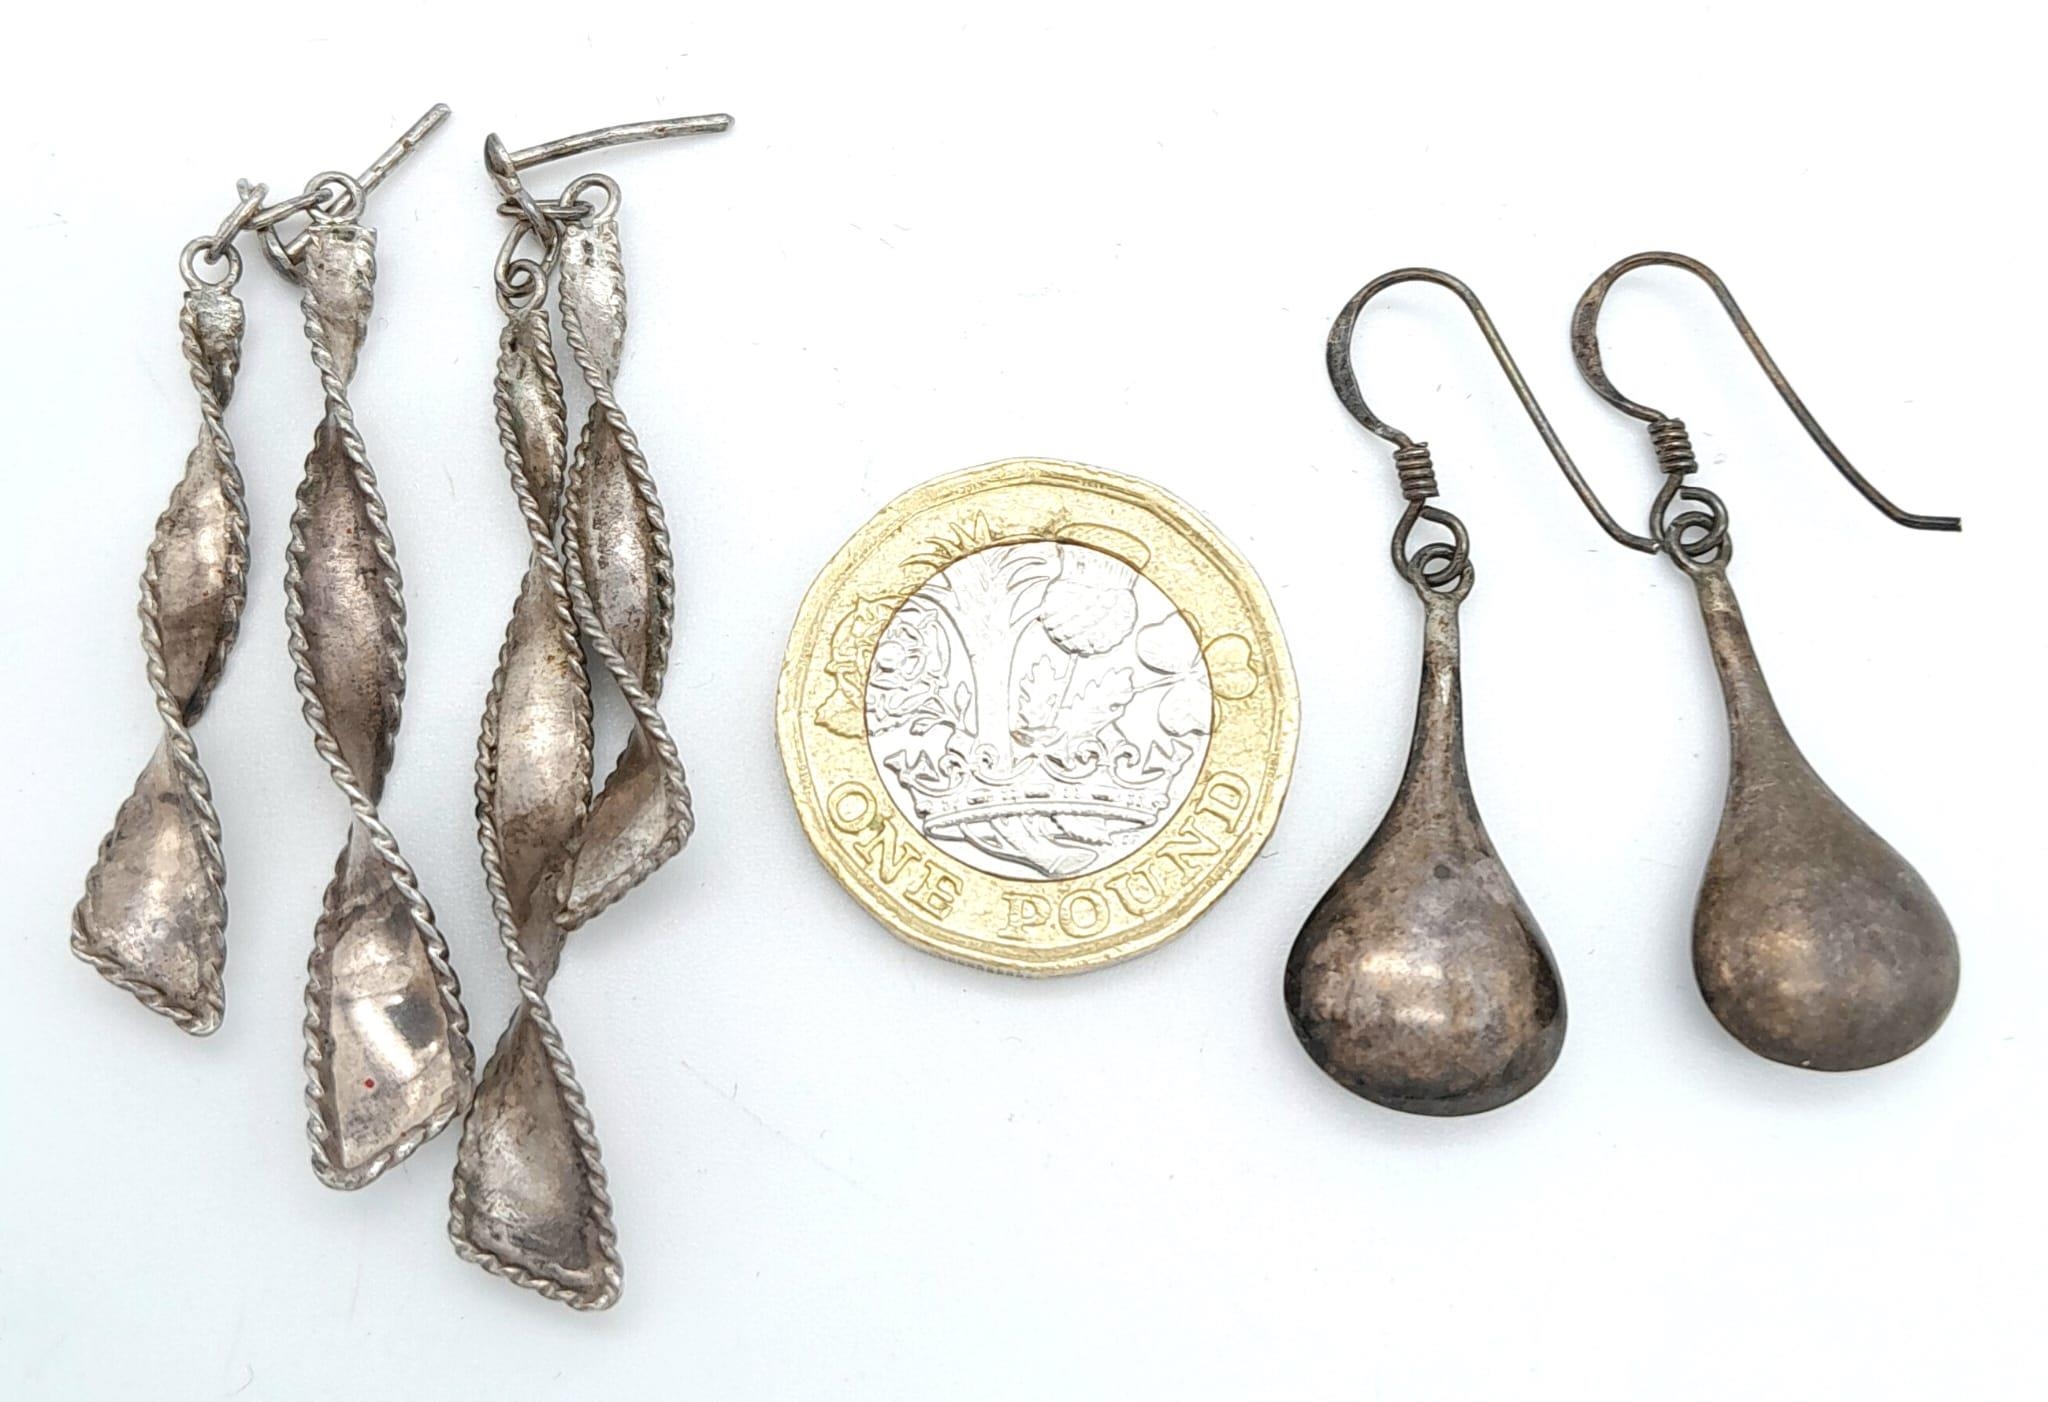 2X stylist pairs of vintage silver earrings. Total weight 6.6G. Please see photos for details. - Image 2 of 7